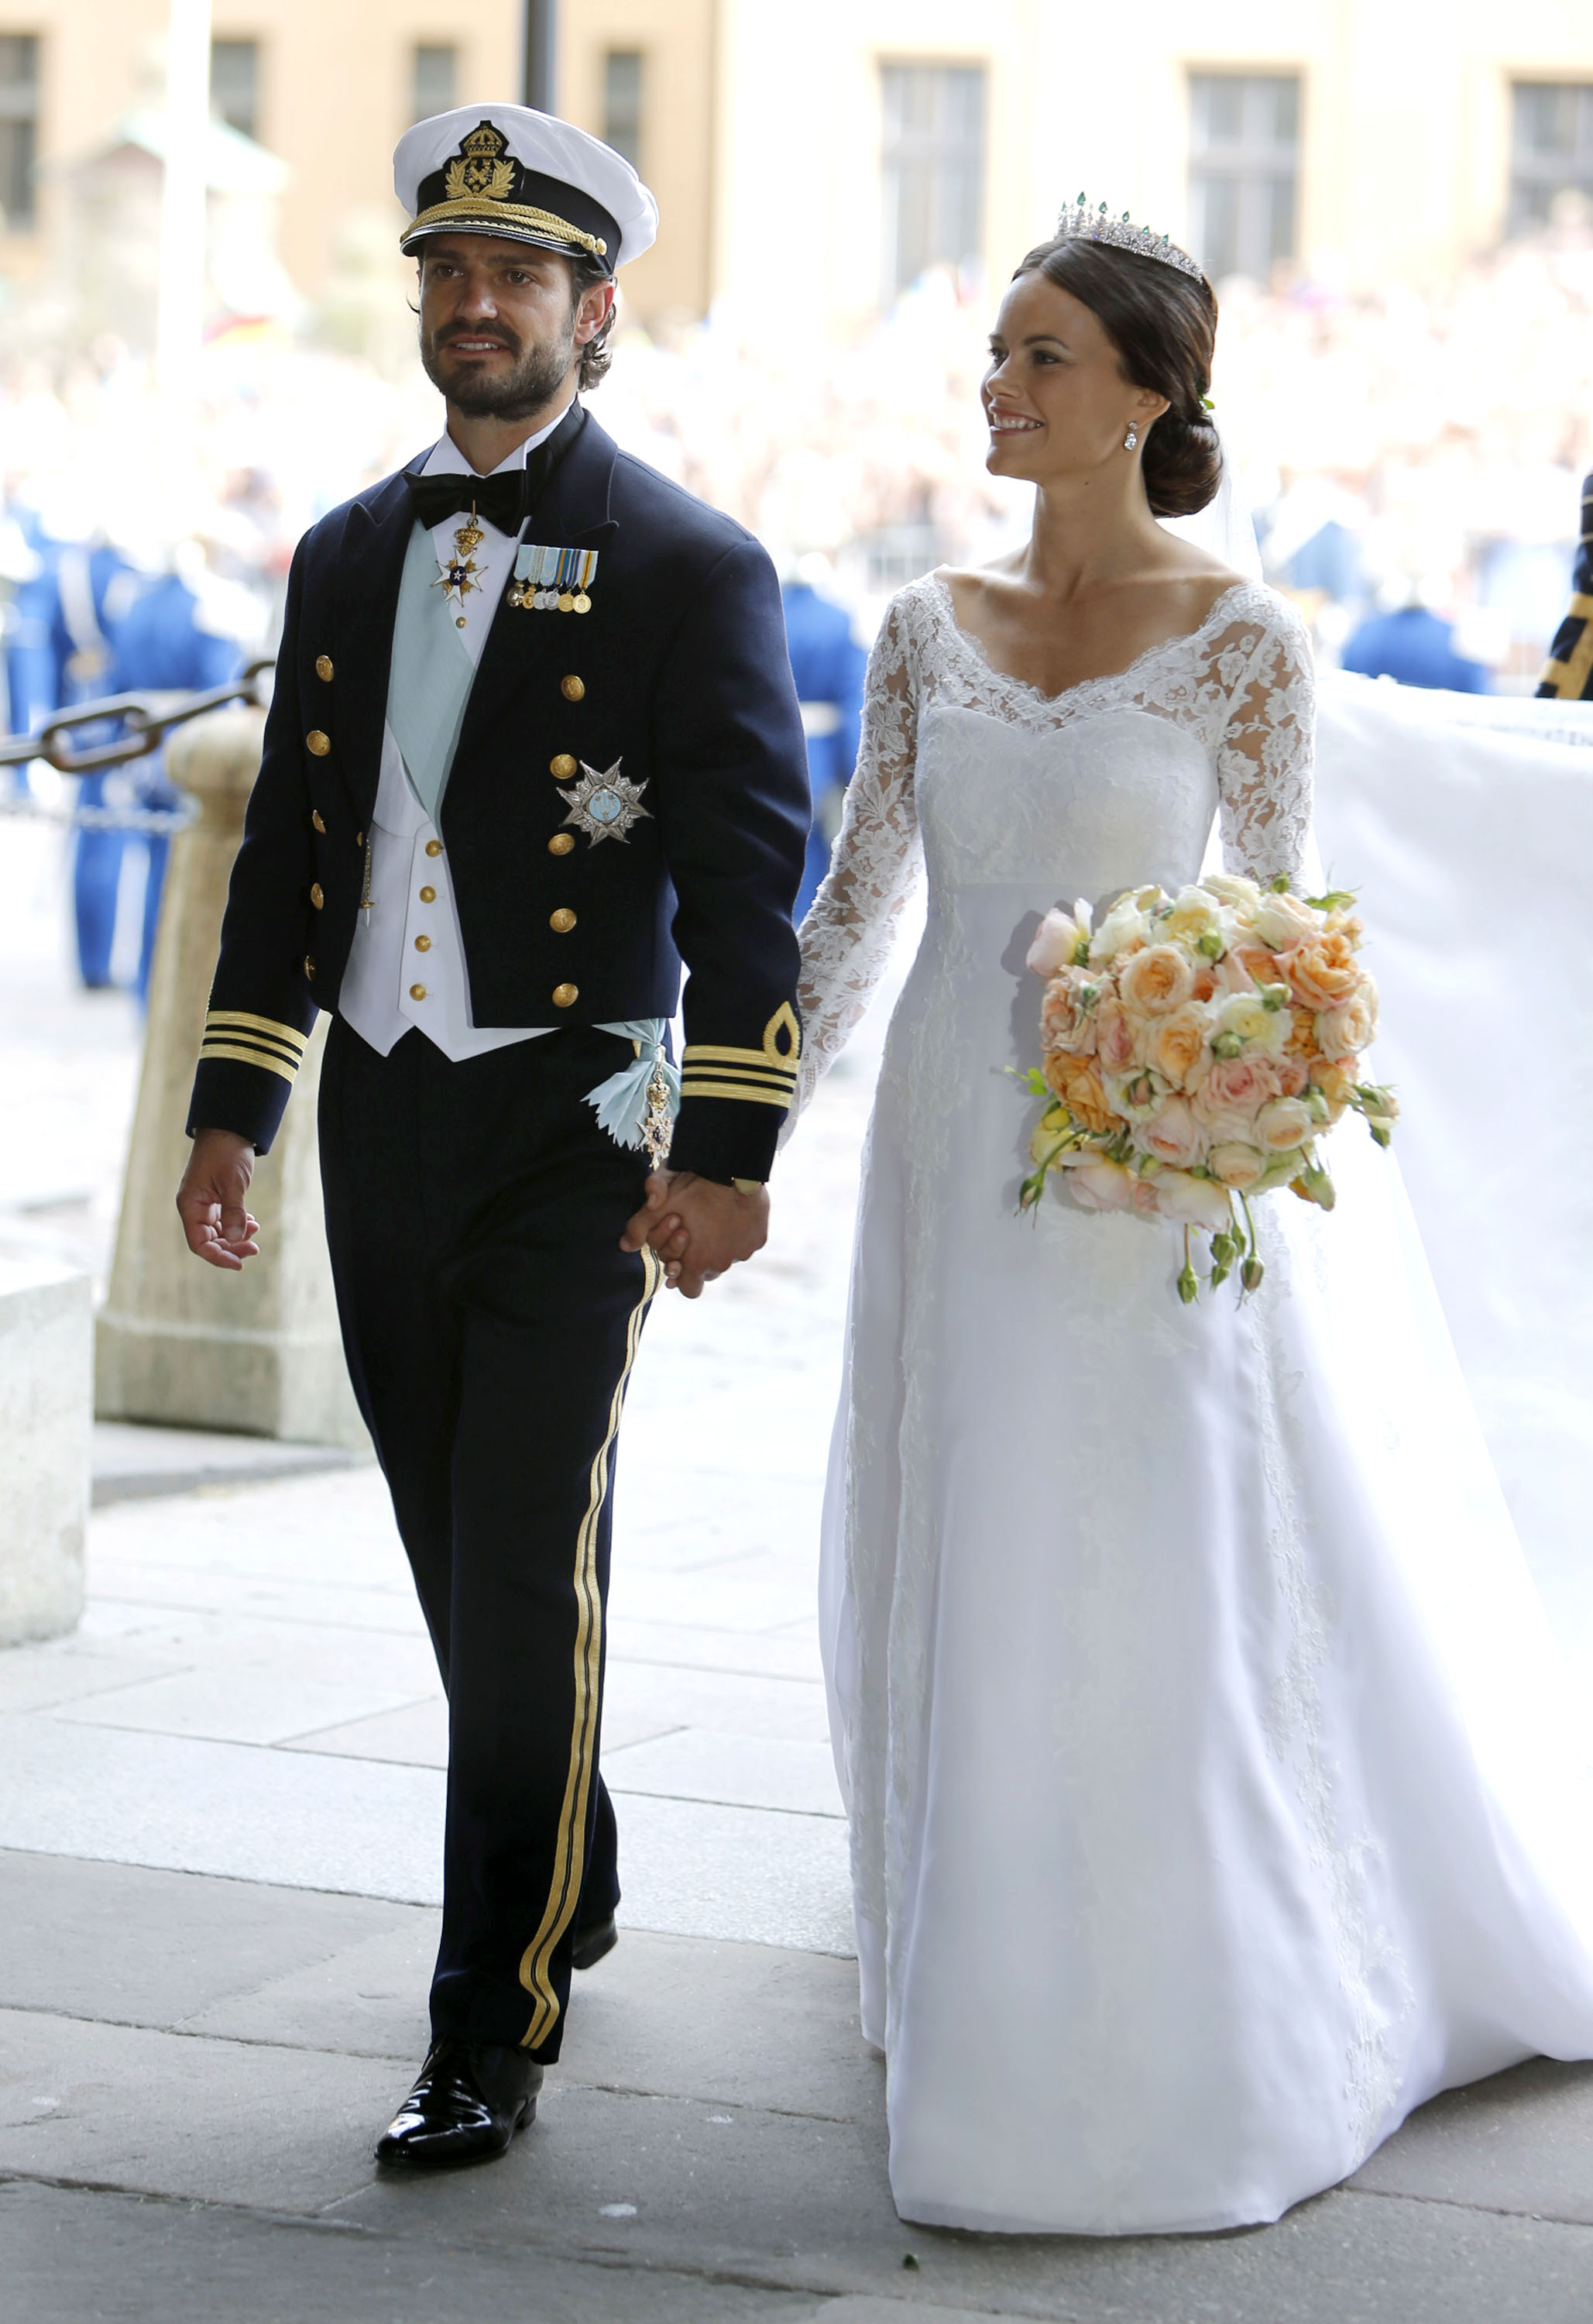 Royally Played: The Wedding of Prince Carl Philip and Sofia Hellqvist: The Bride and Groom